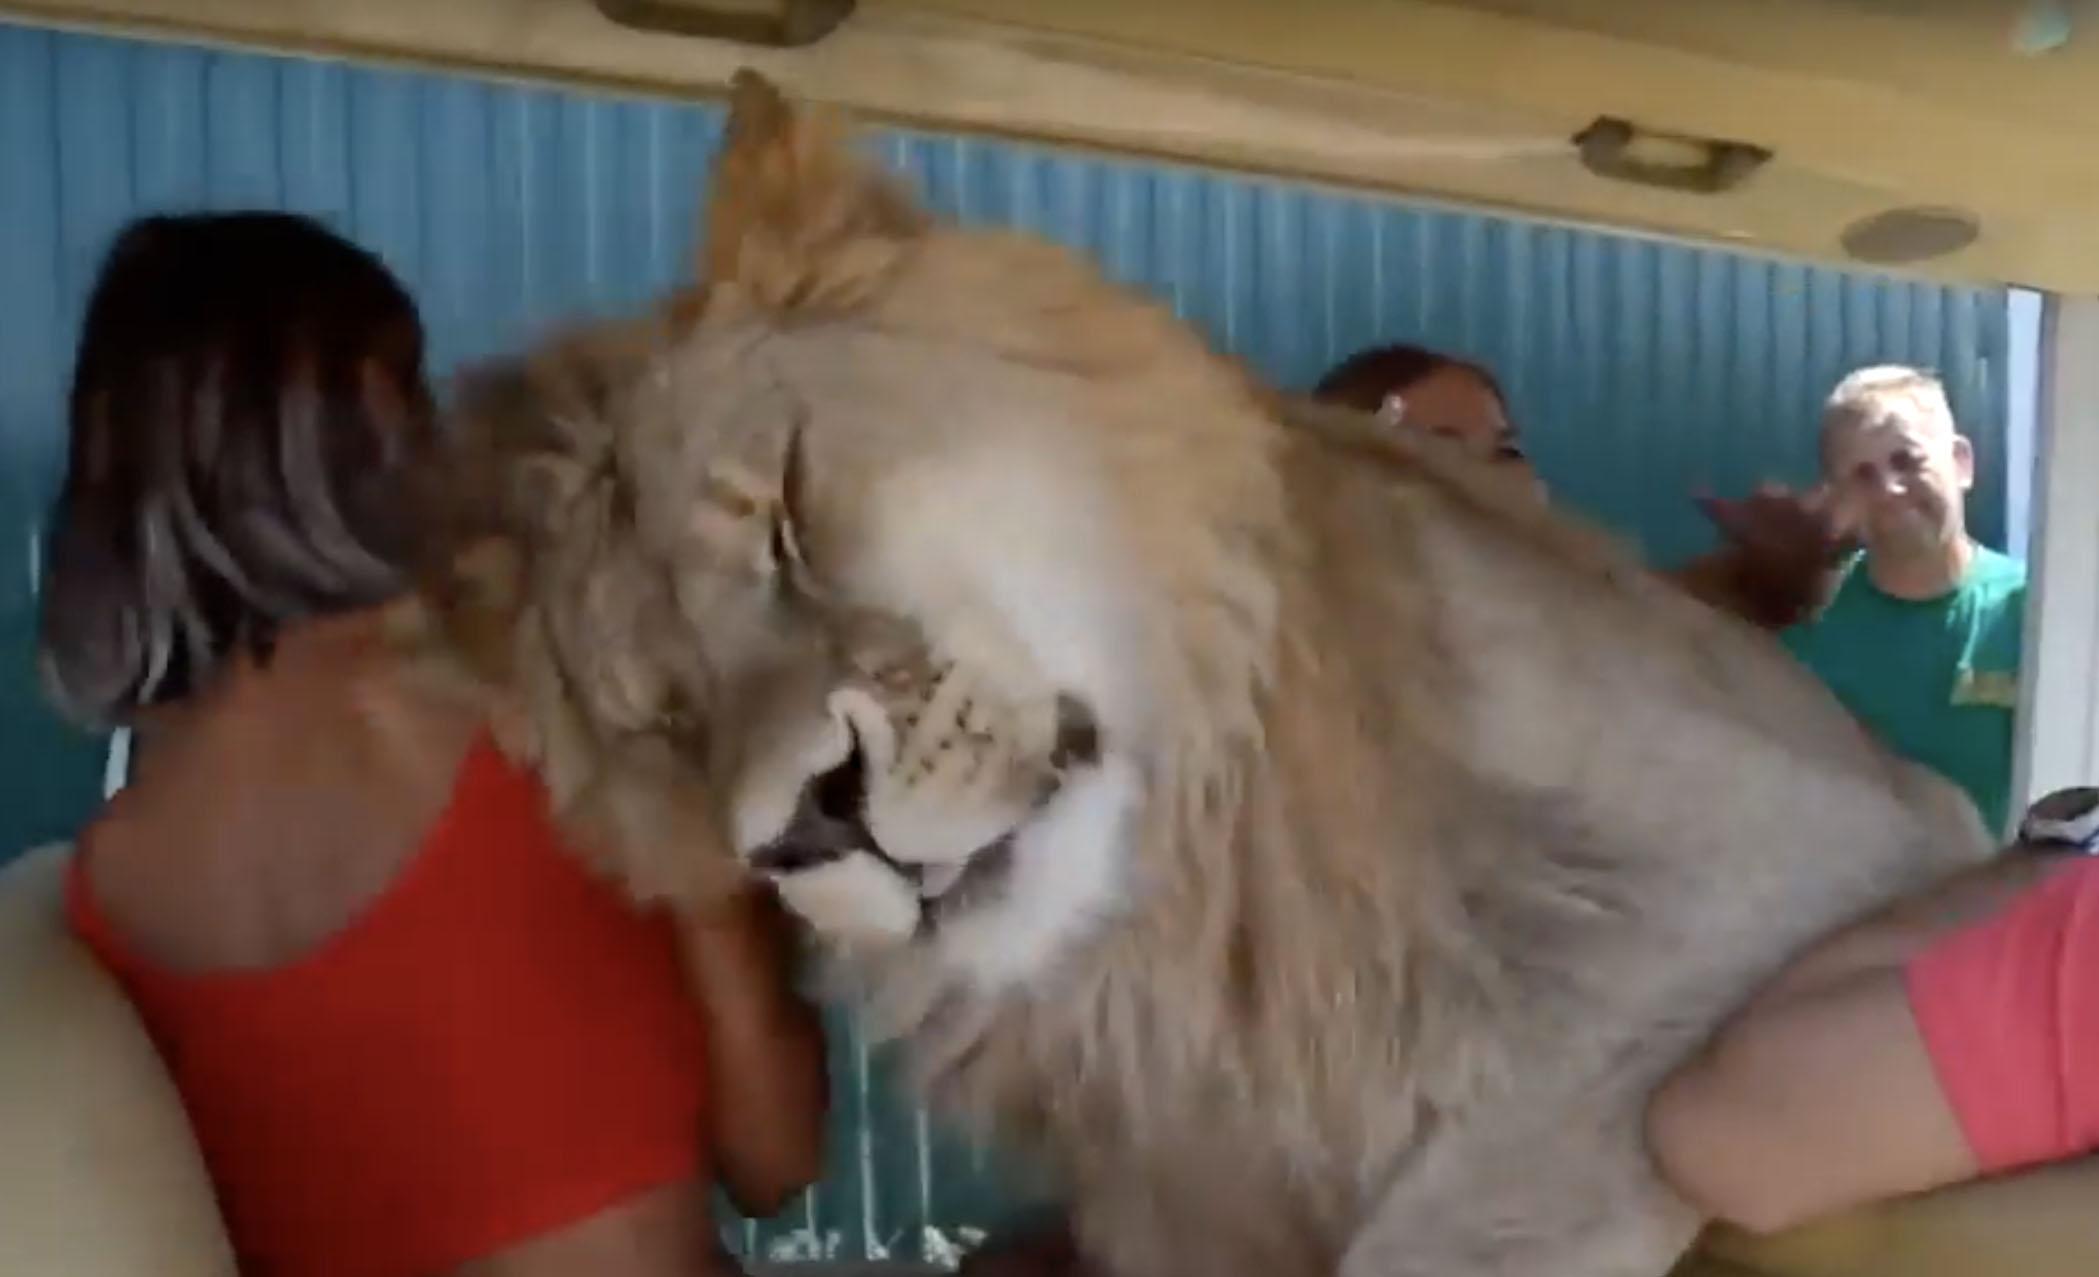  Passengers were surprised by the lion being so friendly towards them